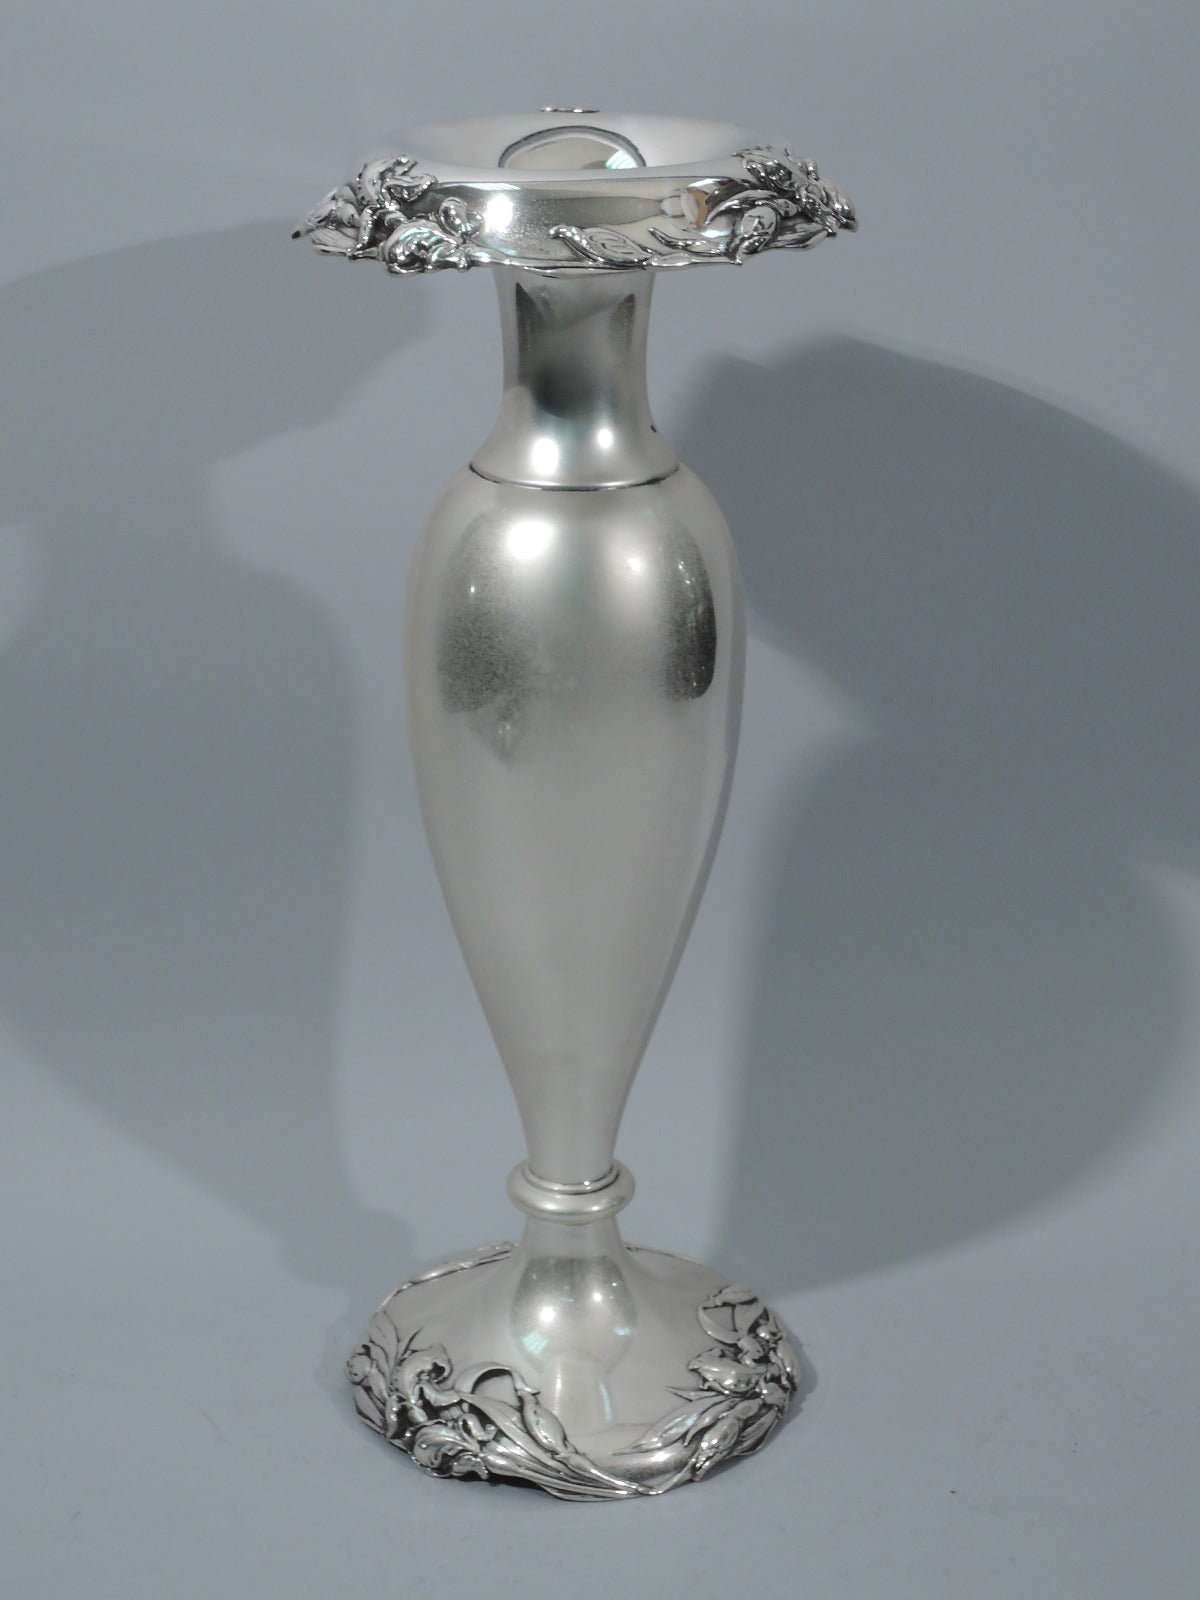 20th Century Art Nouveau Sterling Silver Vase by Reed & Barton